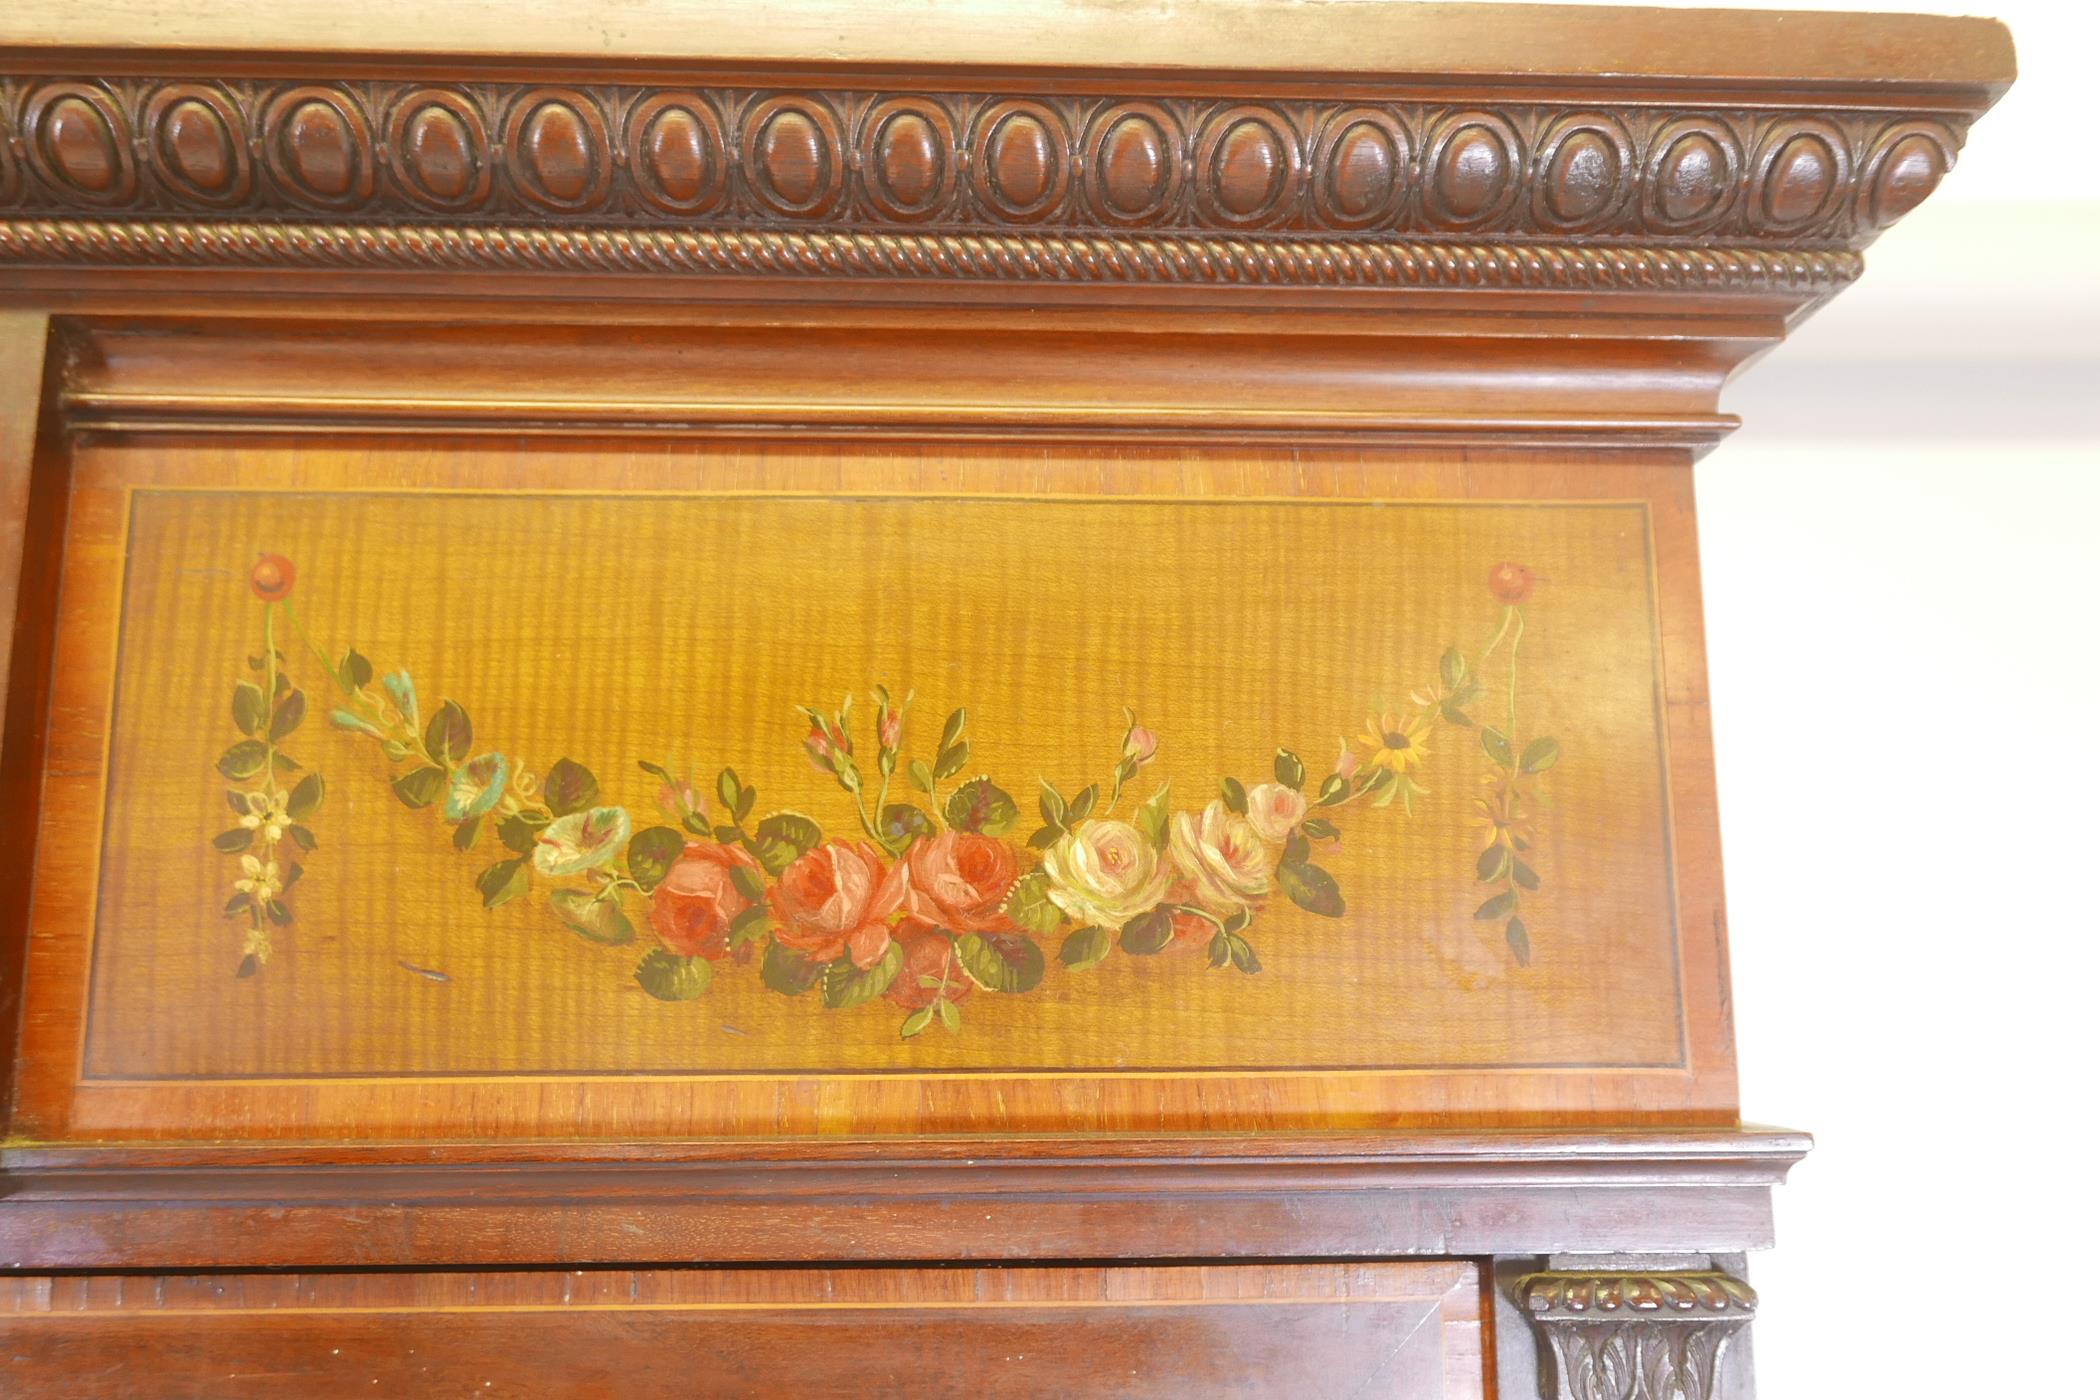 A C19th mahogany two section mahogany display cabinet, with satinwood banded inlay and painted - Image 5 of 8